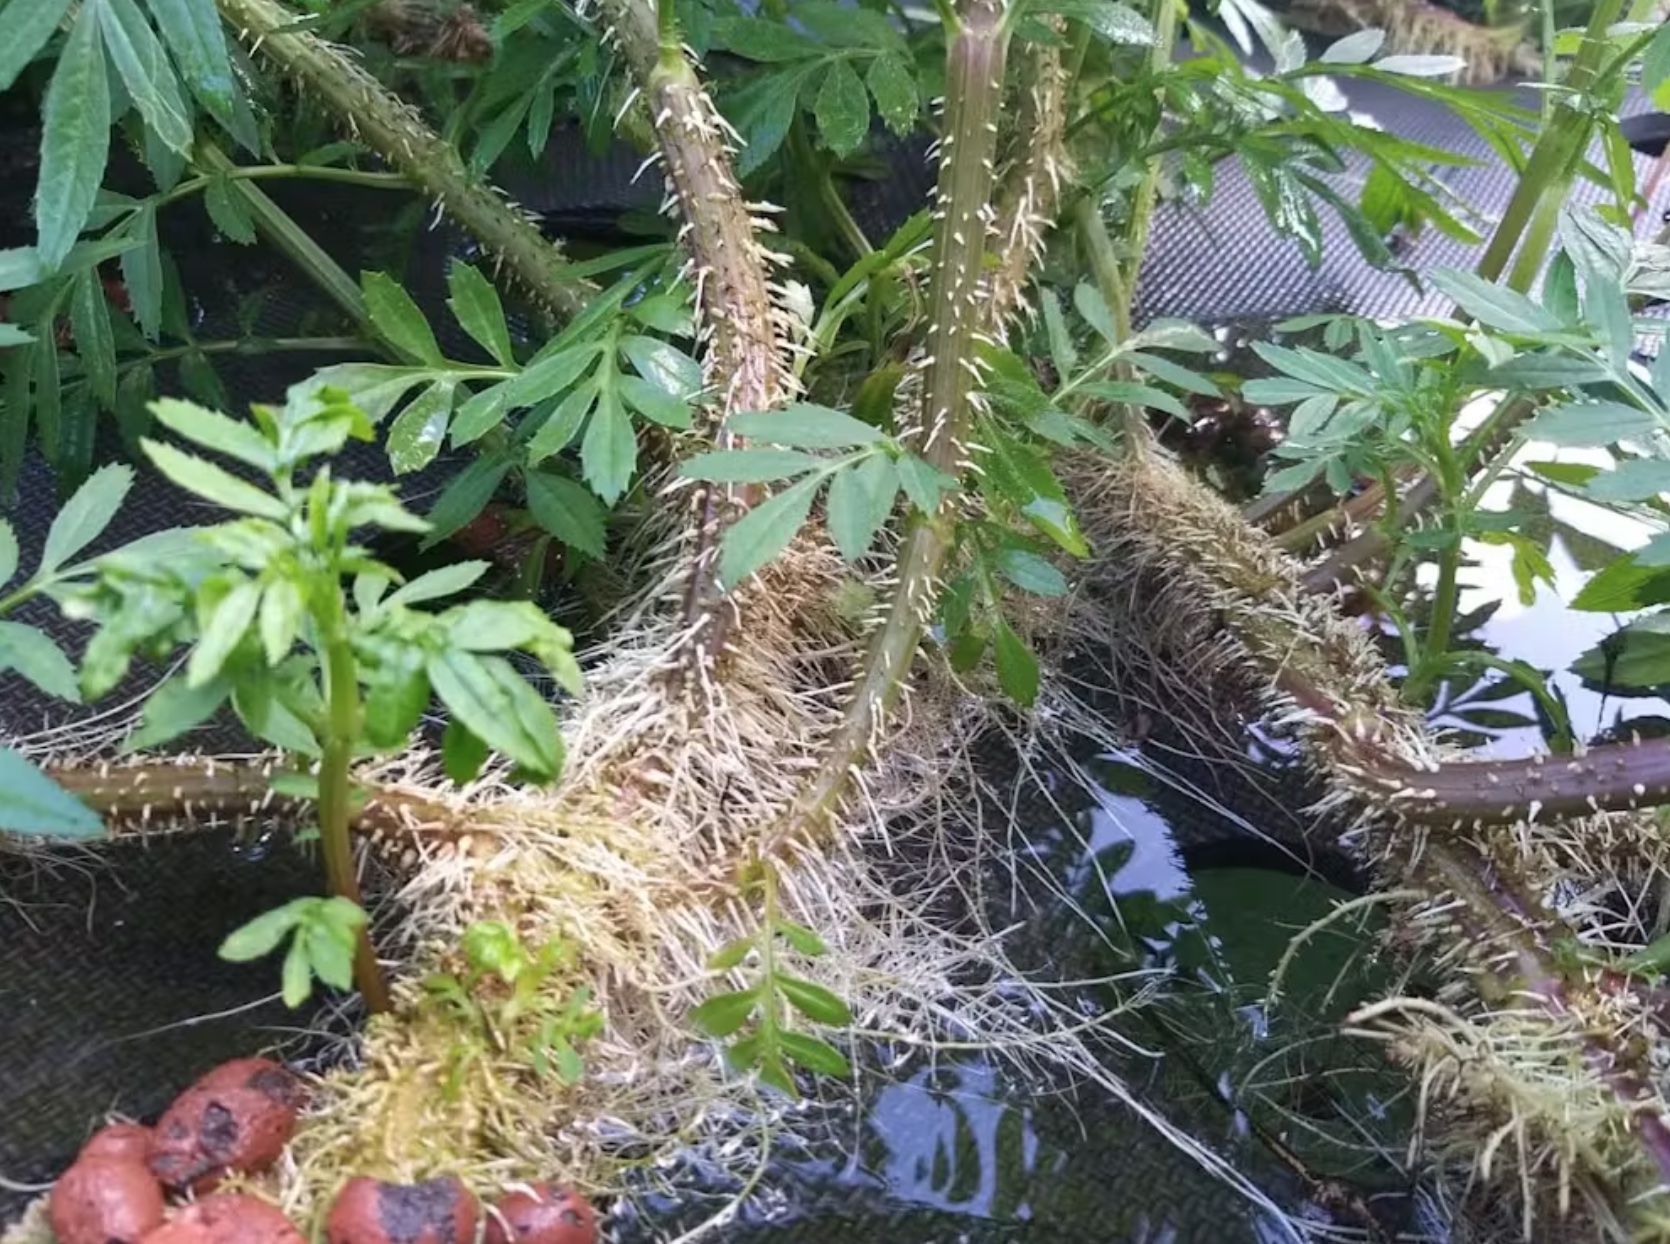 The roots of a plant are growing in a pond.